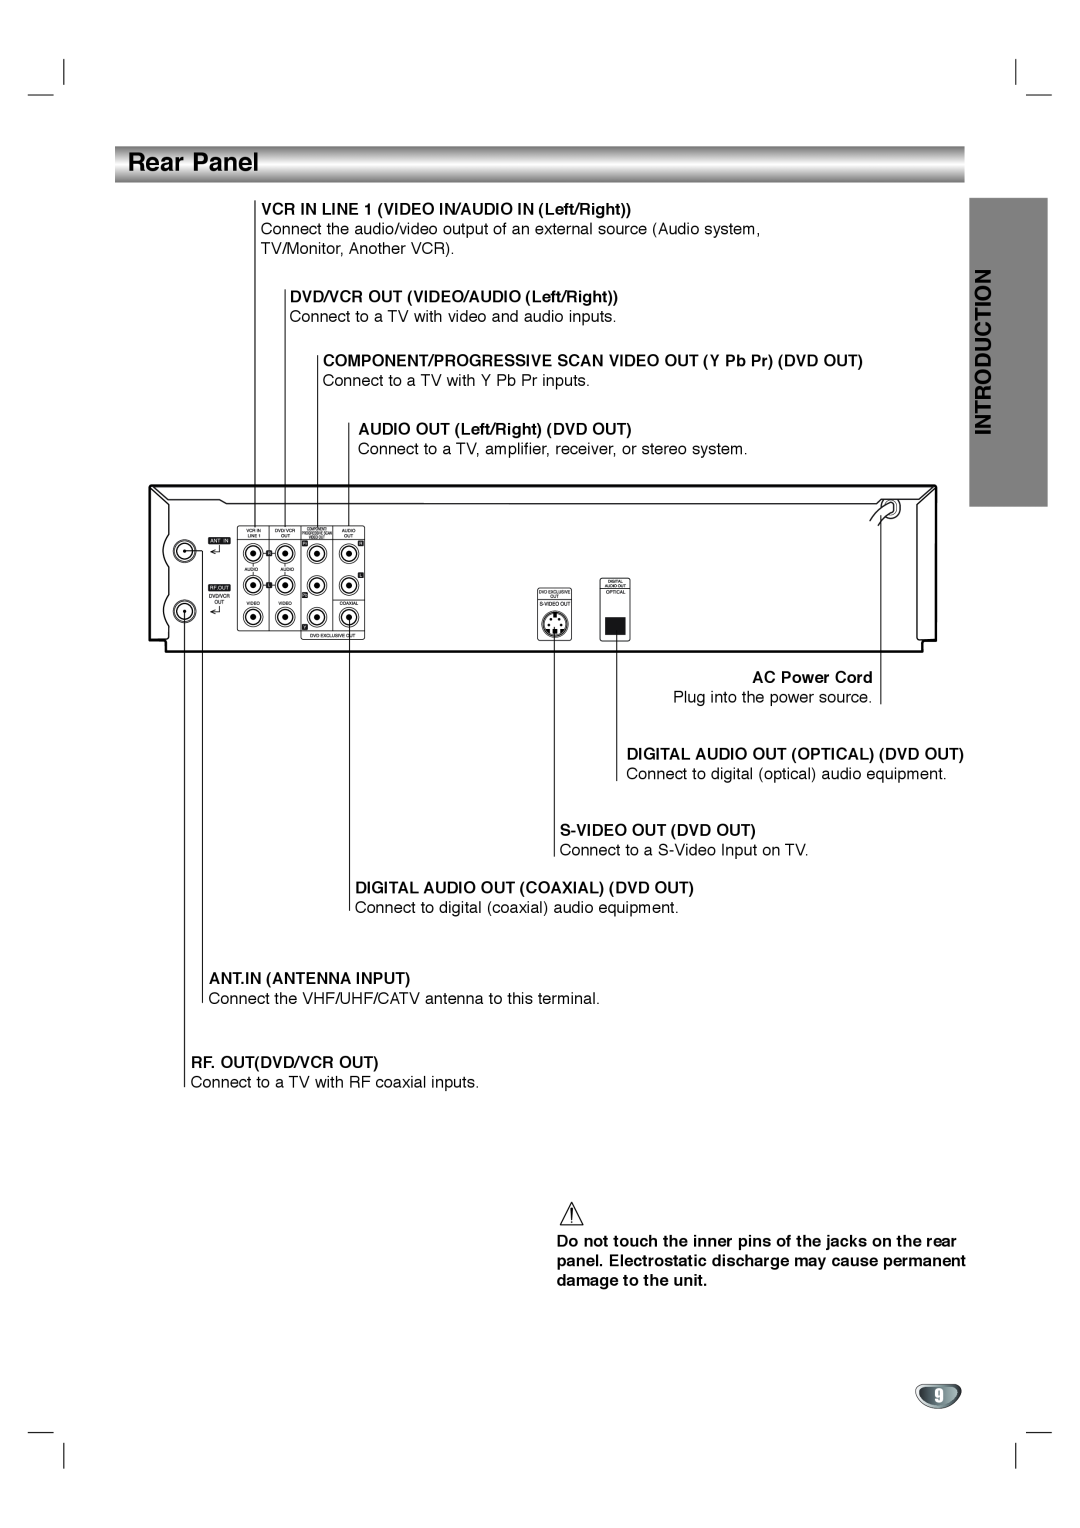 Toshiba SD-K530SU owner manual Rear Panel, Introduction 